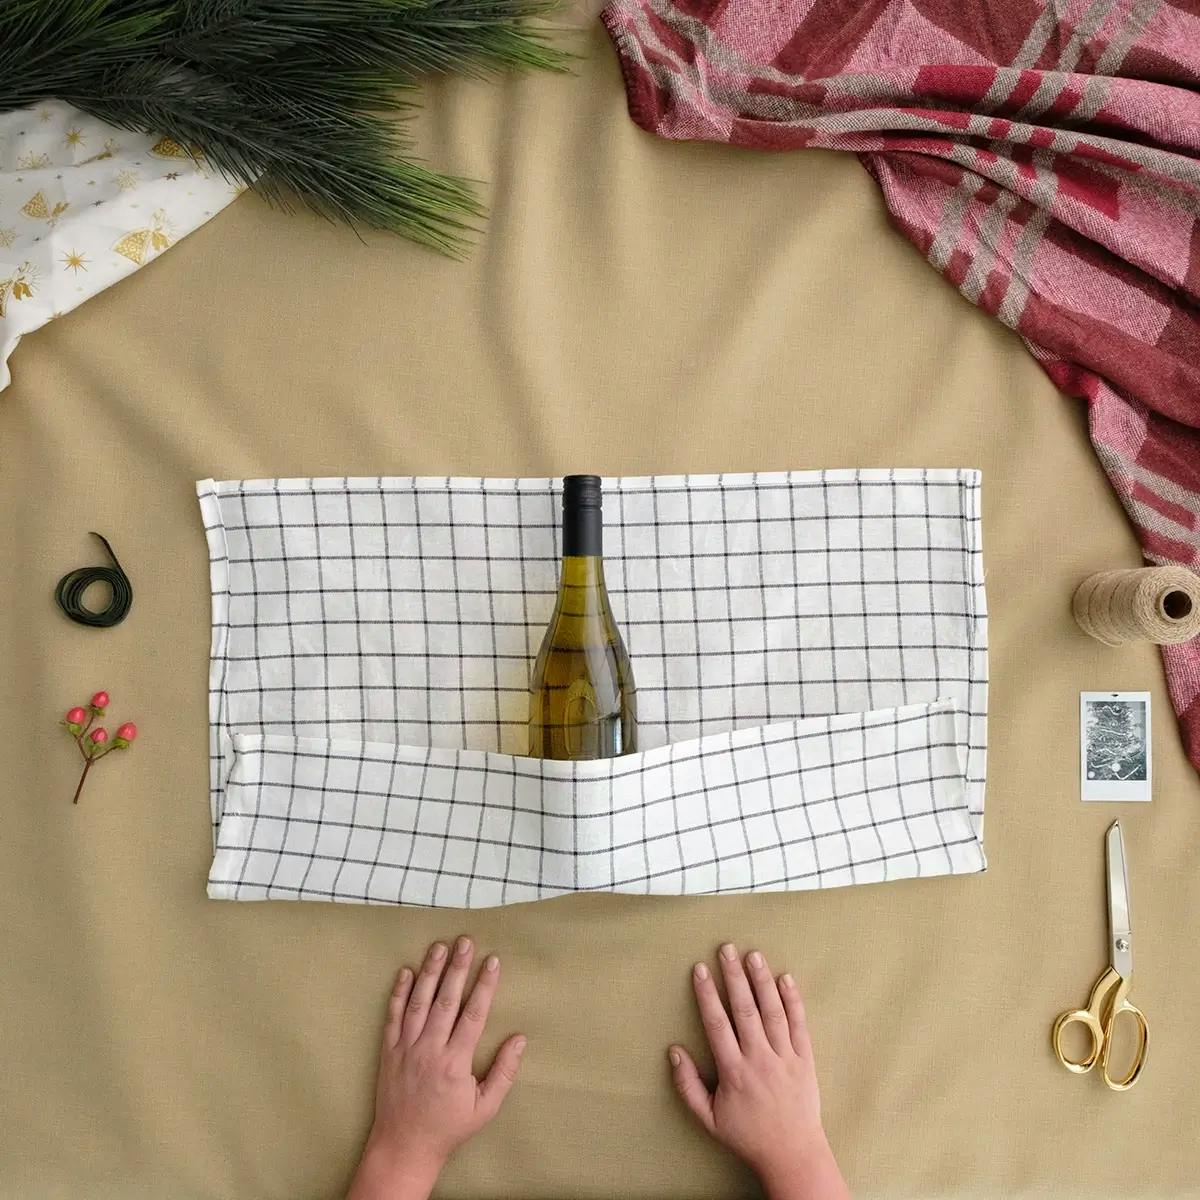 Folding the bottom of the tea towel over the base of the wine bottle.